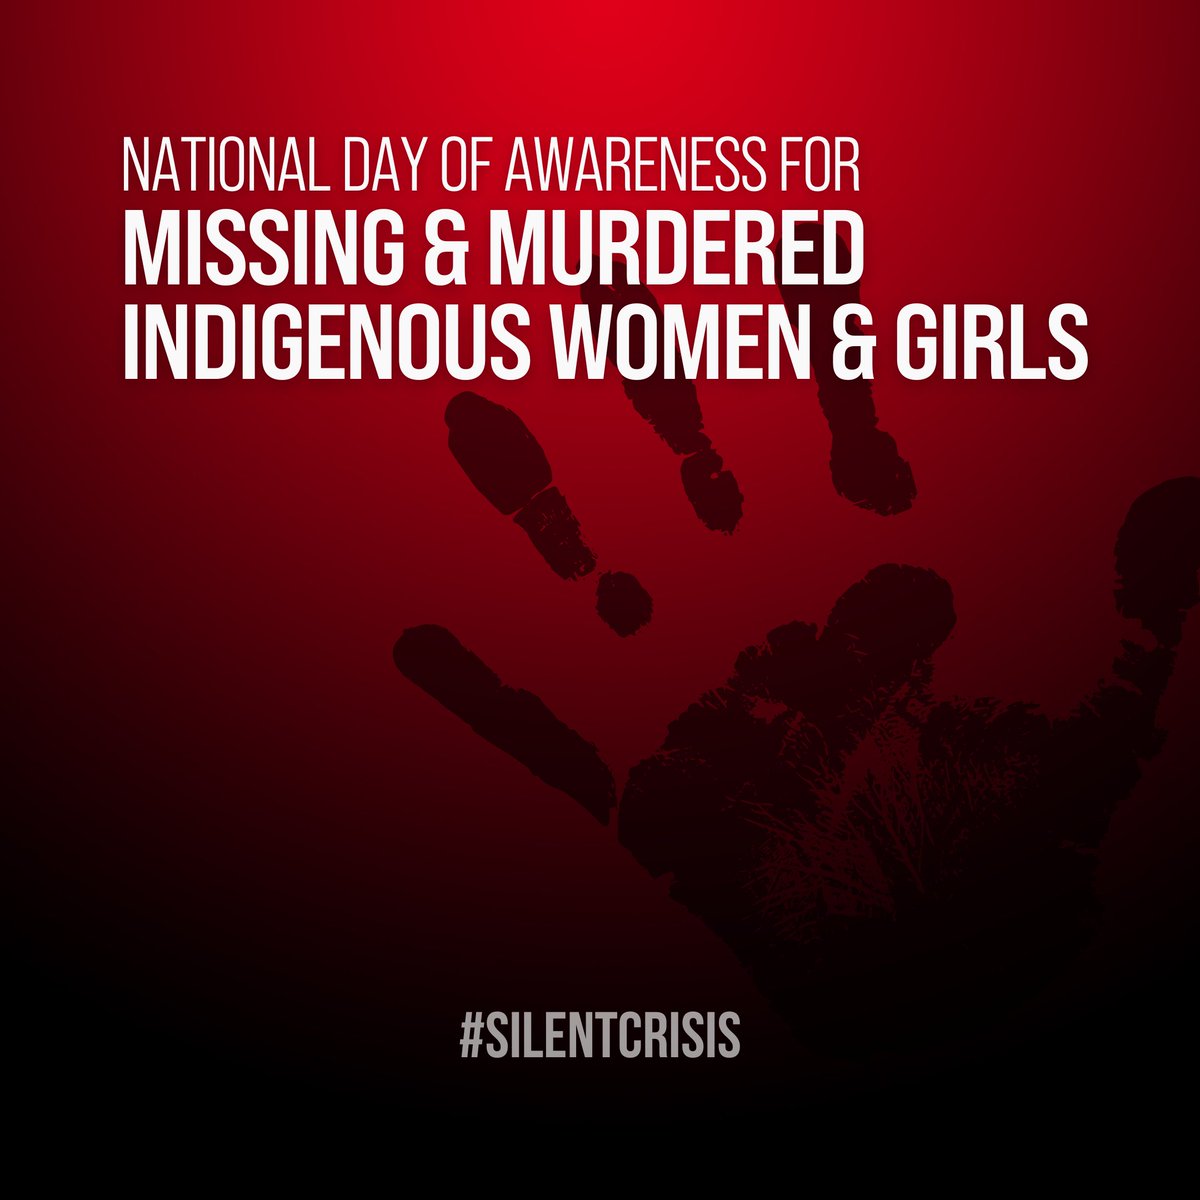 Native women and girls suffer disproportionately high rates of violence and murder. Their voices will not be silenced. Today, I stand with Native communities on this National Day of Awareness for Missing & Murdered Indigenous Women & Girls.